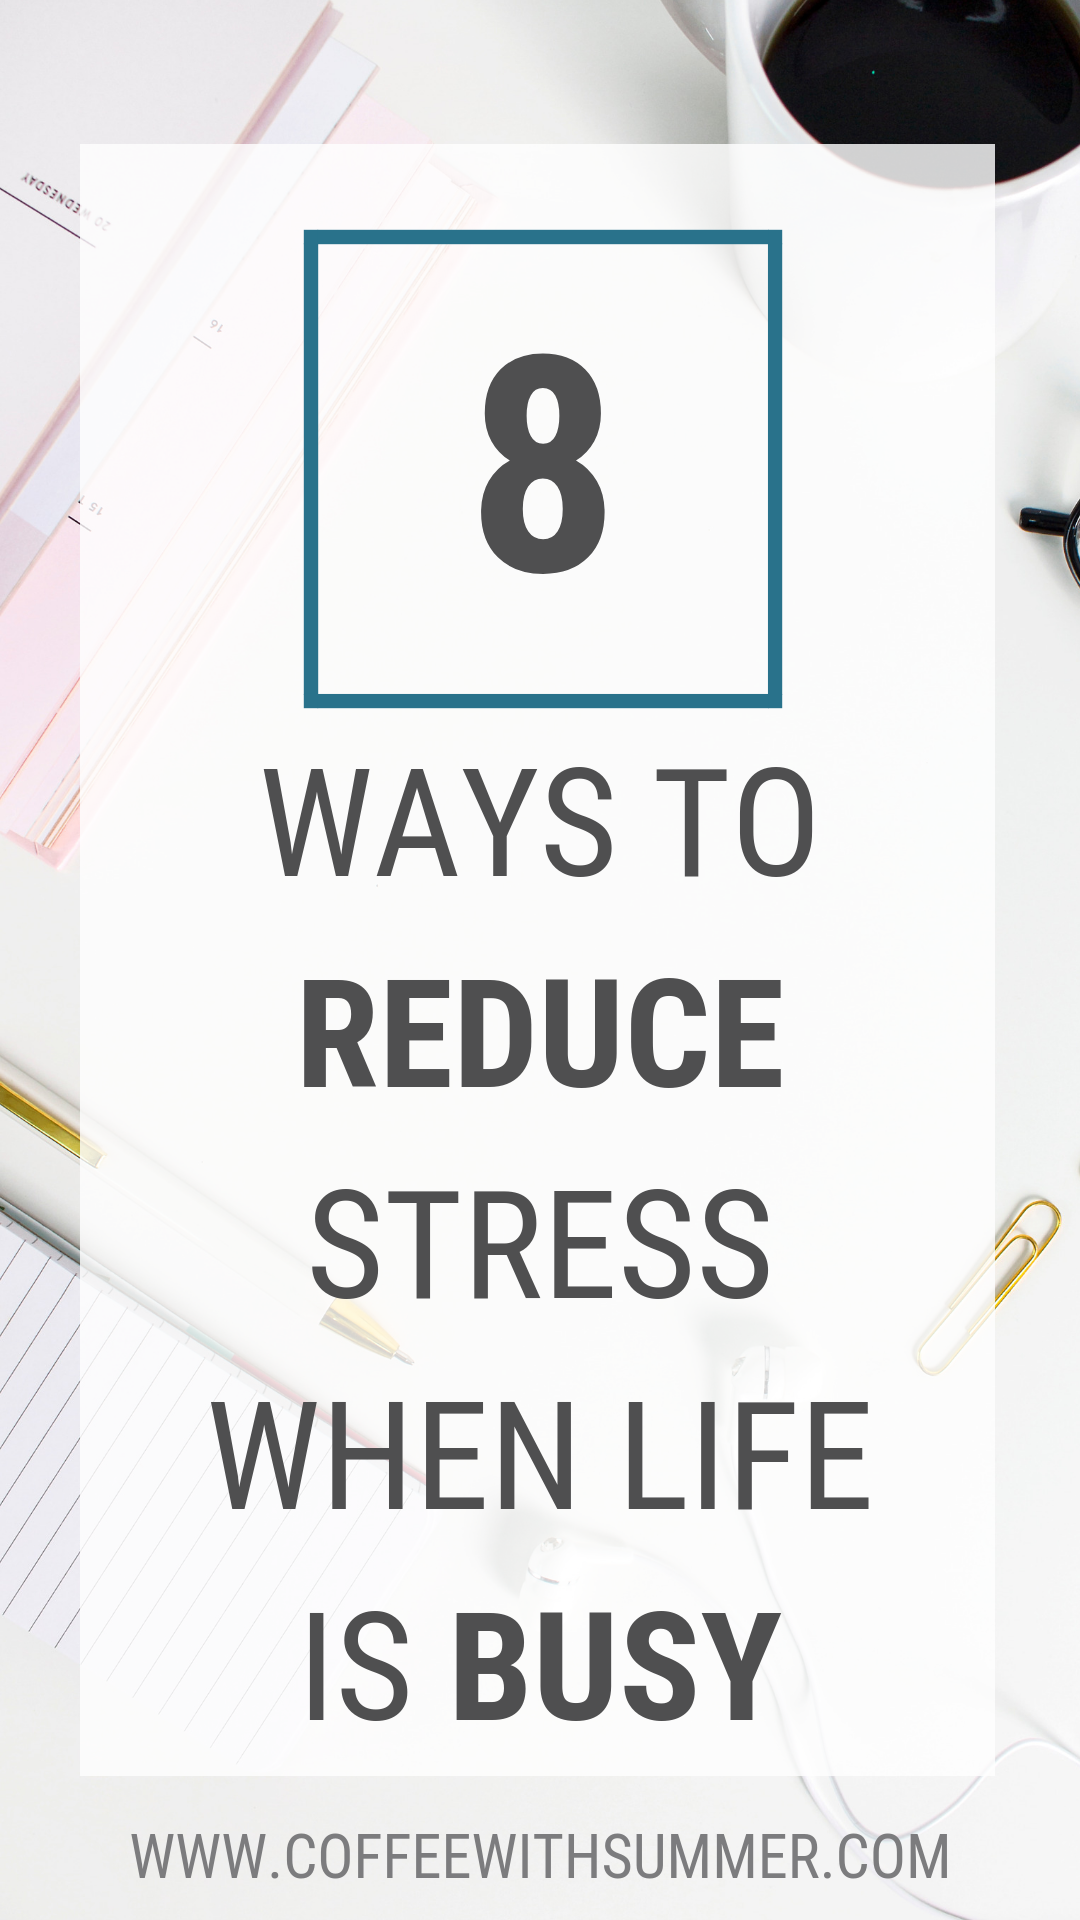 How To Reduce Stress When Life Is Busy